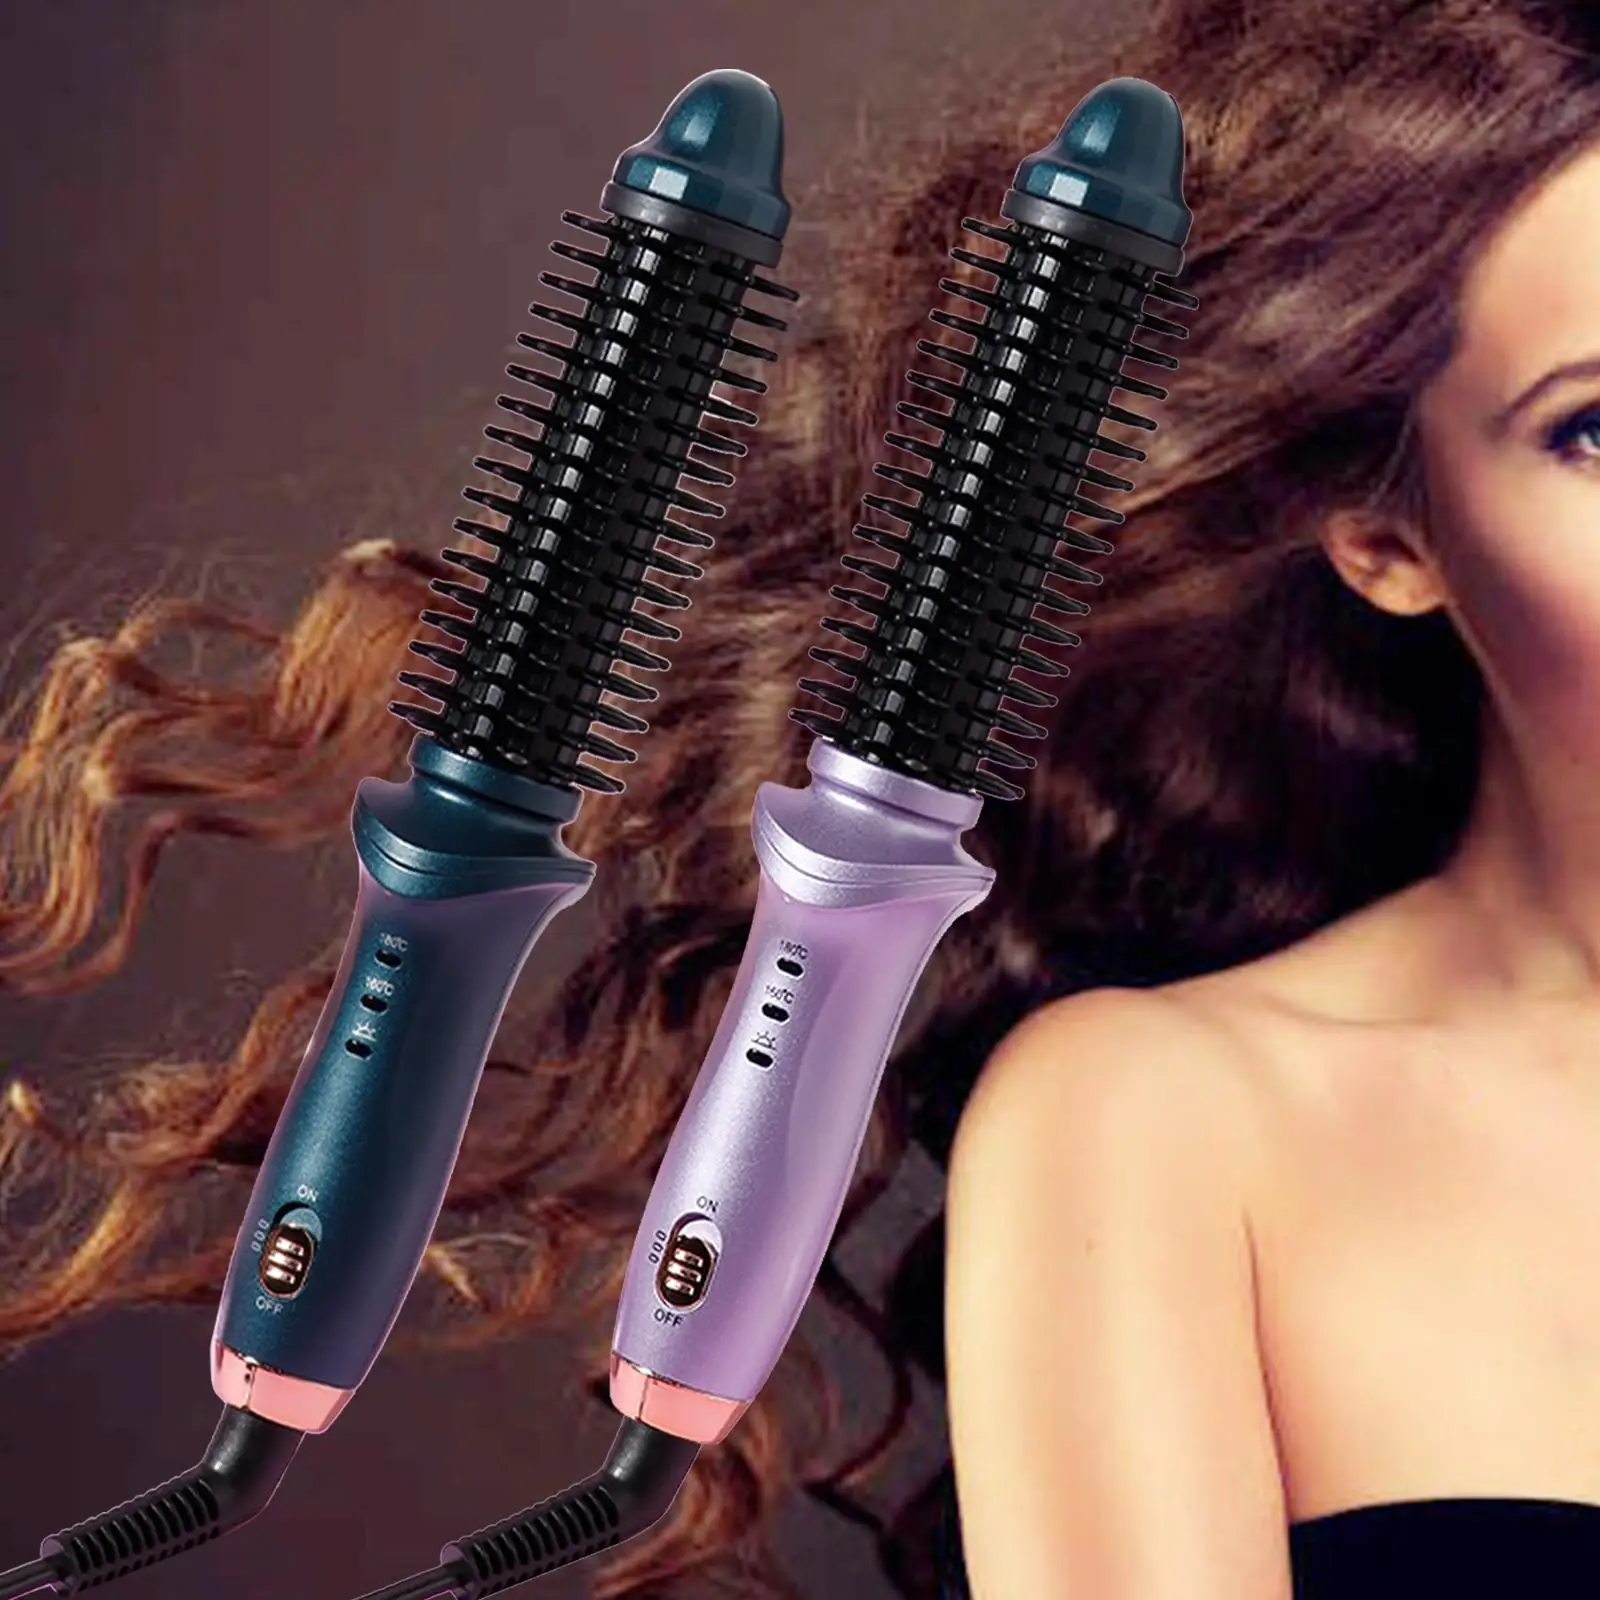 Auto Hairer Hair Straightener Ptc Fast Heating 2 Rotating Full Automatic Compacting for Salon Waves DIY